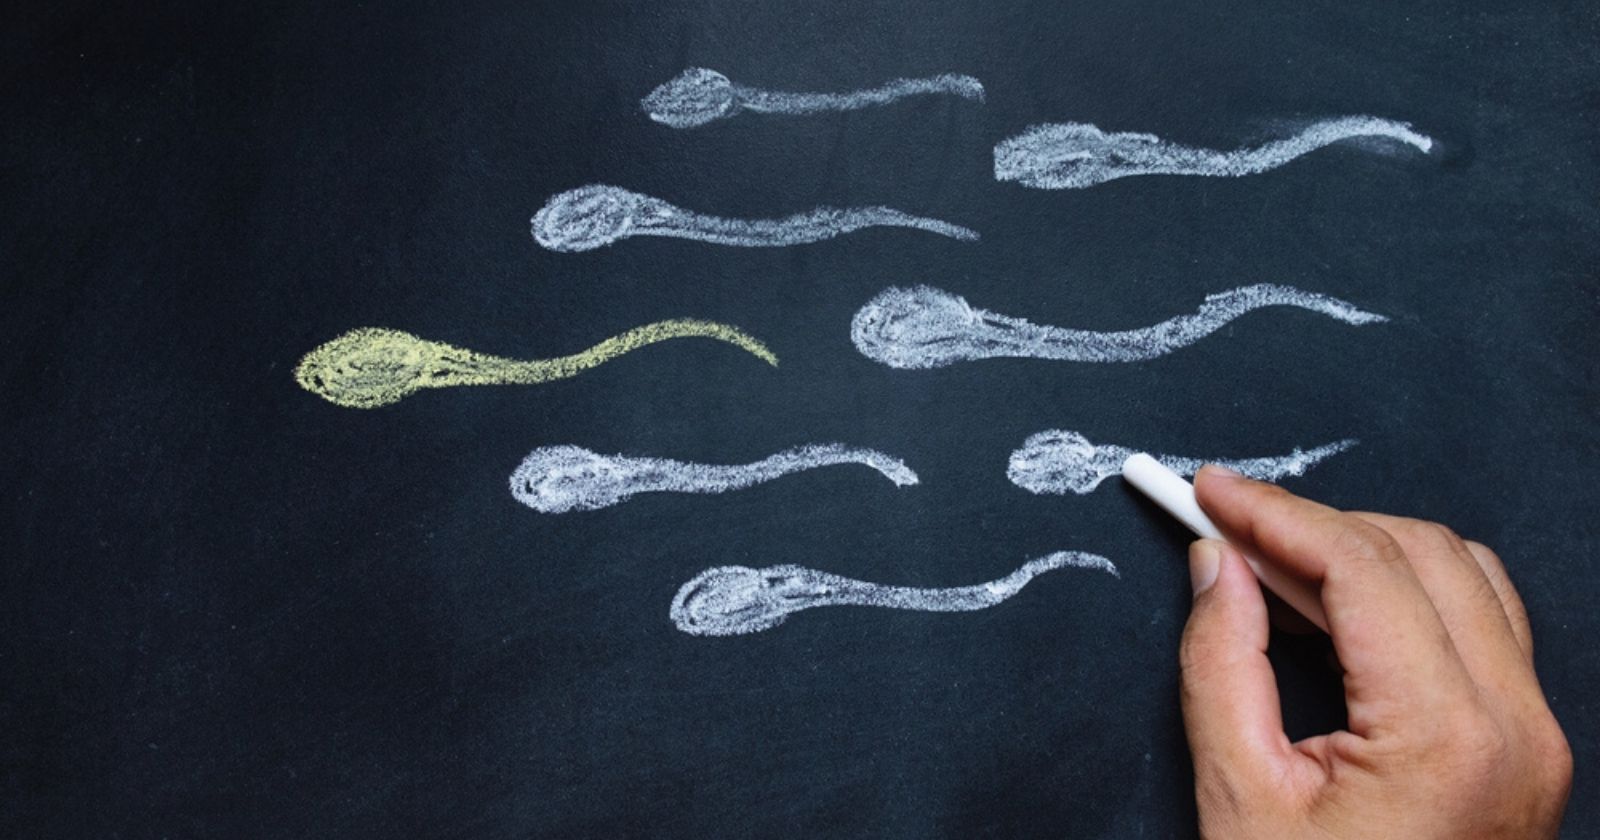 PMA: Sperm and egg donation reached record high in 2021